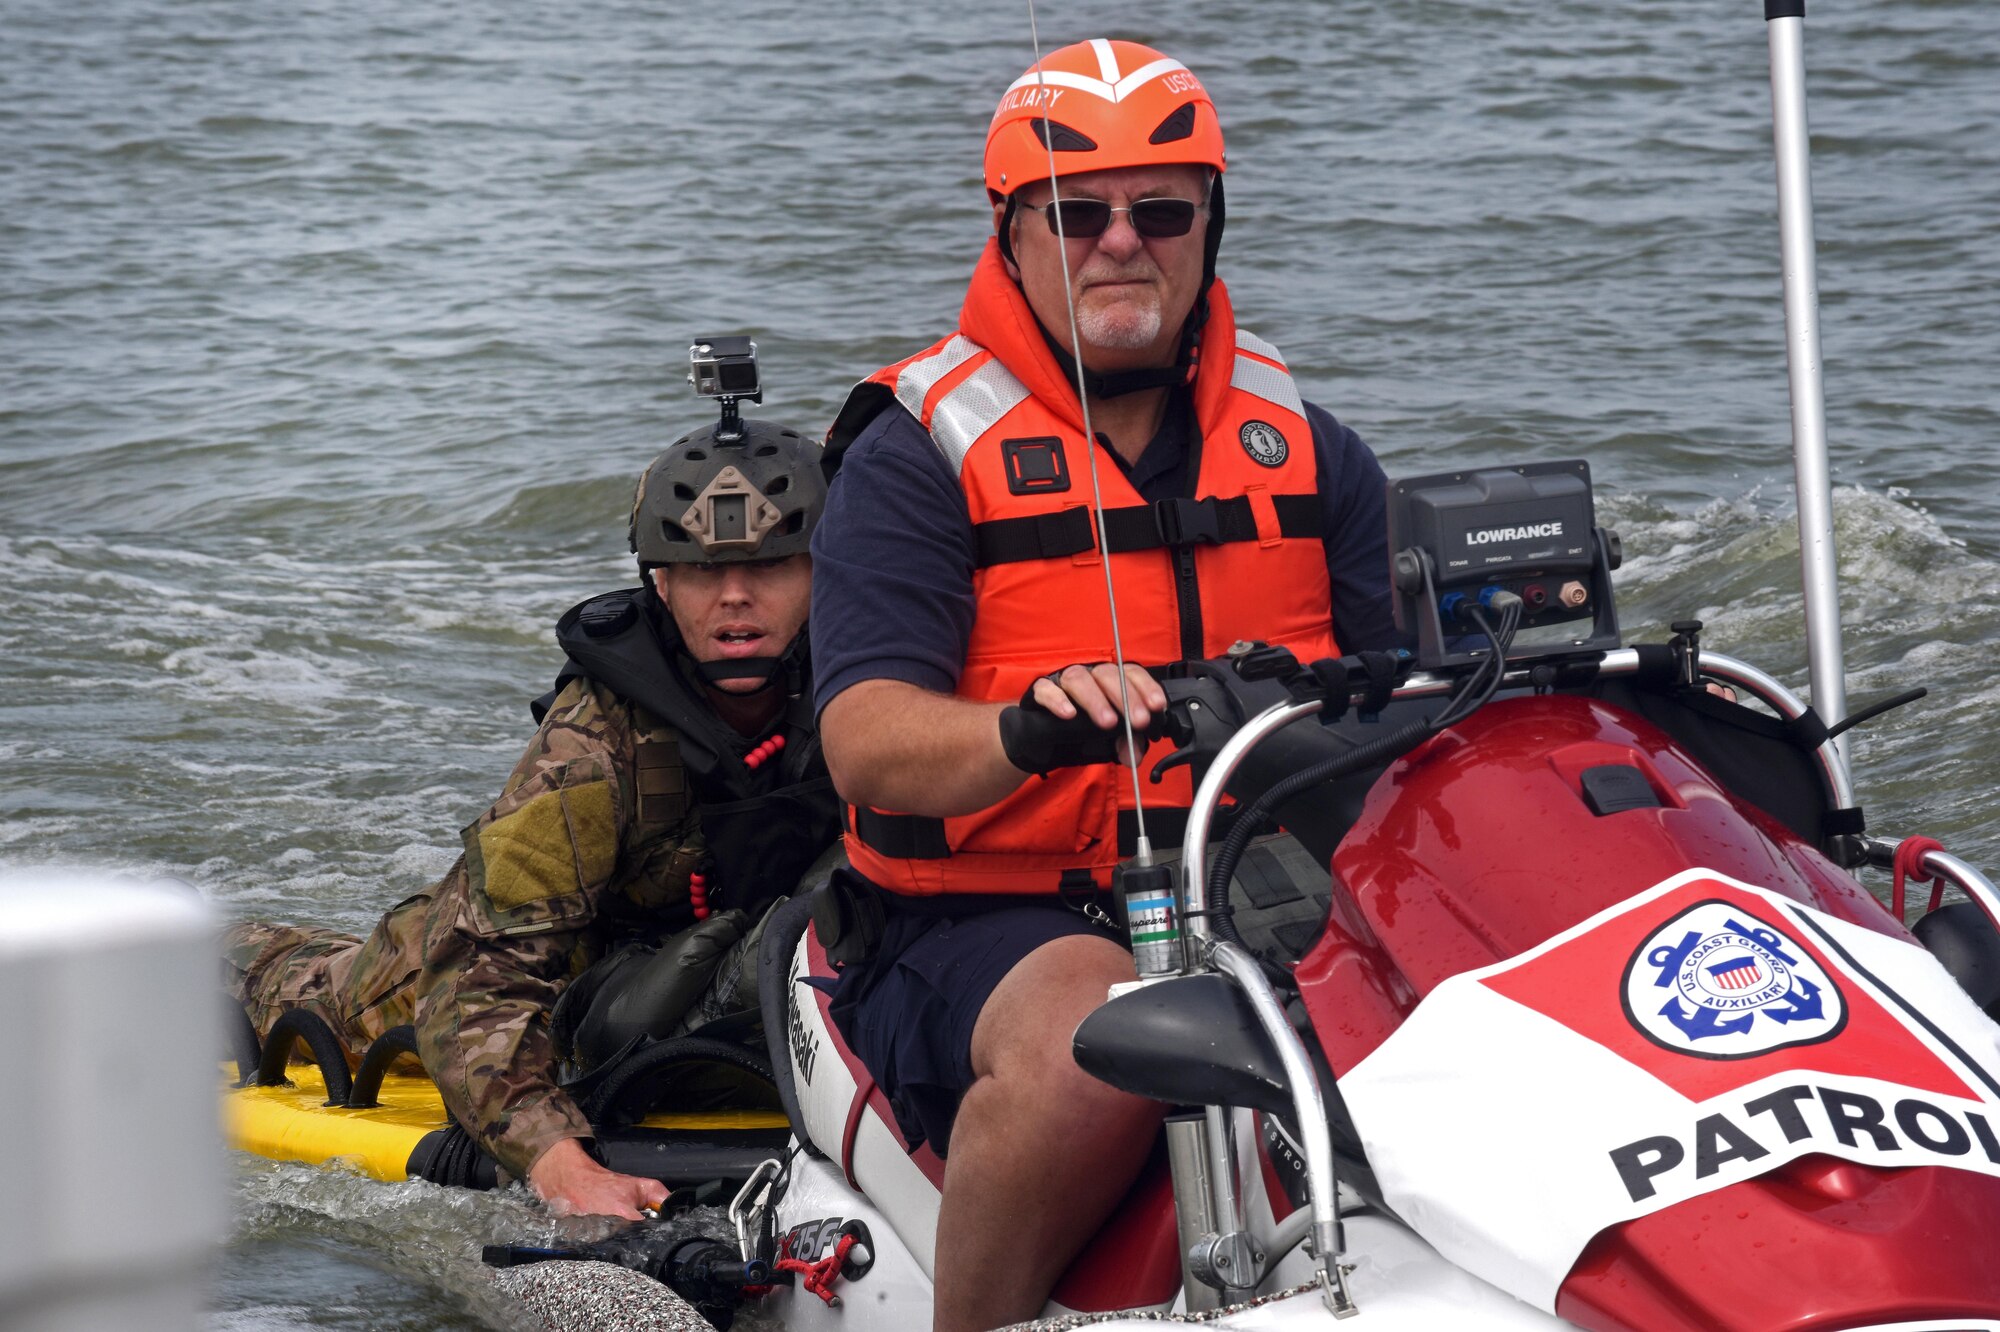 Master Sgt. James Henderson, 181st Weather Flight special operations weatherman, rides with a U.S. Coast Guard Auxiliary member to drop off his parachute gear after a deliberate water drop into Lake Worth in Fort Worth, Texas, May 20, 2017. The mission allowed 12 service members to parachute out of a C-130 Hercules from an altitude of 1000 feet into Lake Worth using MC-6 parachutes. (Texas Air National Guard photo by Staff Sgt. Kristina Overton)